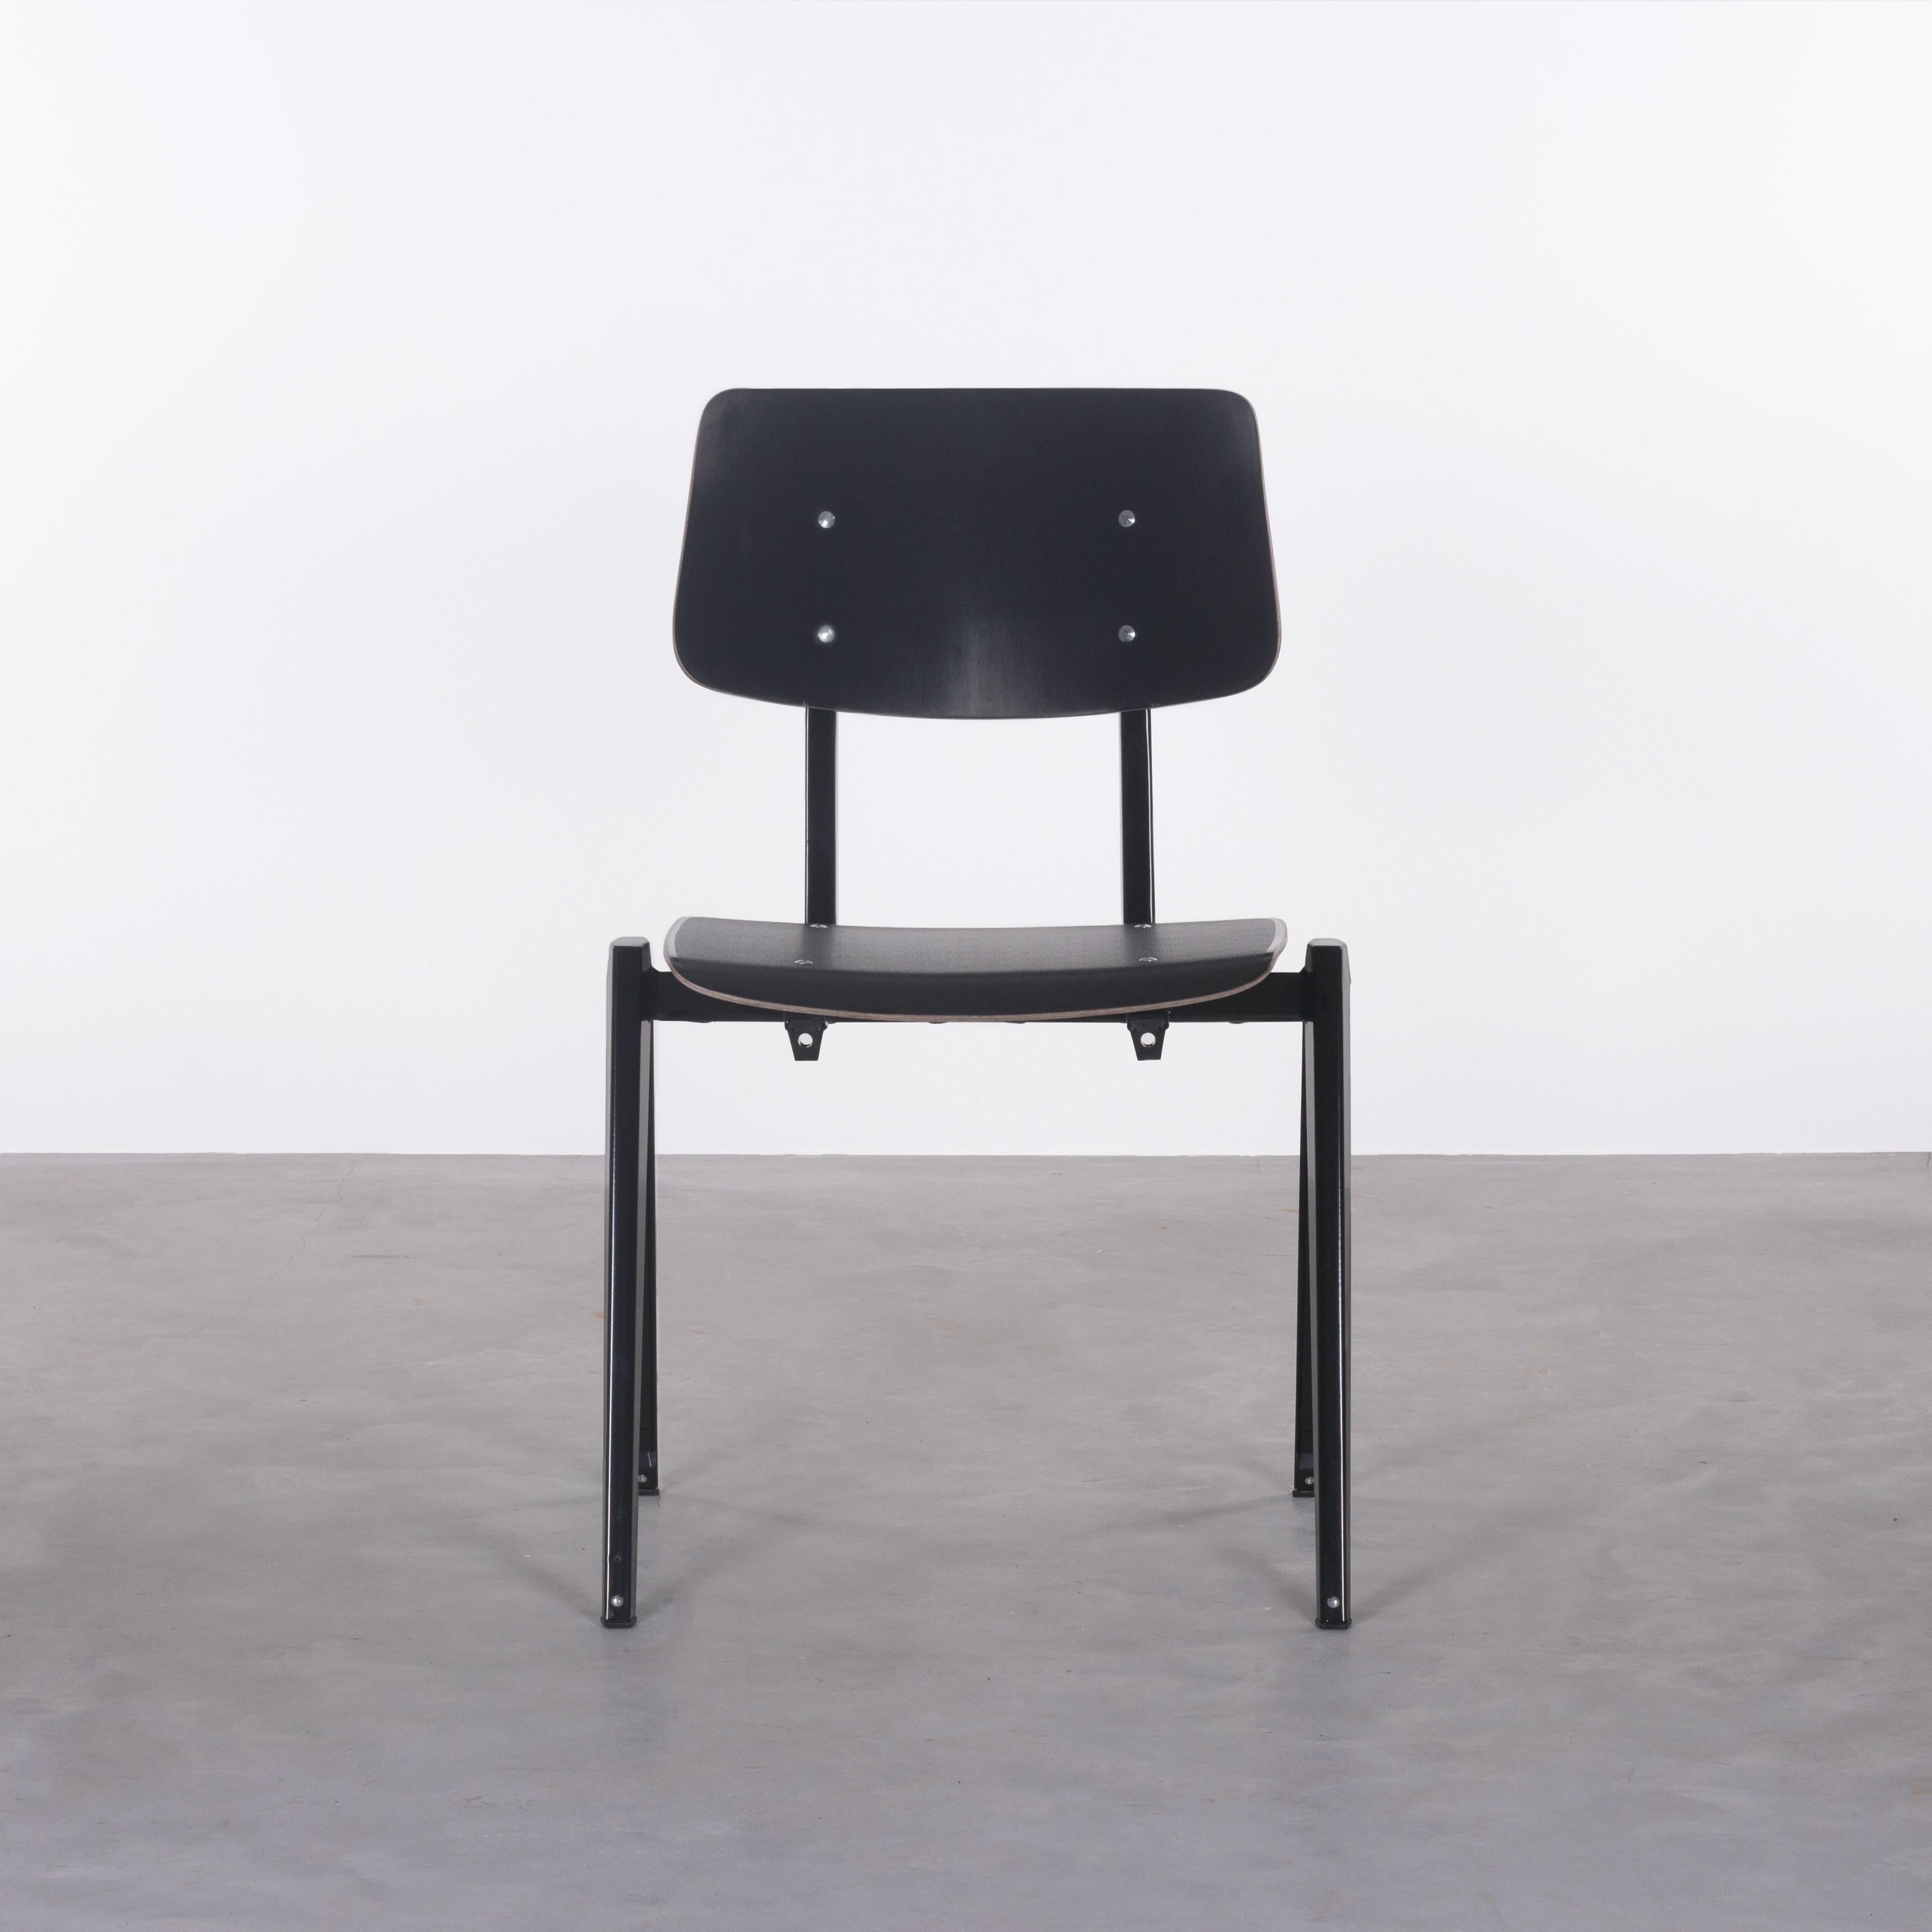 Functional / Industrial Galvanitas S21 stackable plywood chairs in the style of Prouvé. Frames are made of folded sheet steel and seat / backpanel of resin plywood. Stackable with a maximum of 6 chairs. Various colors, quantities and bespoke service